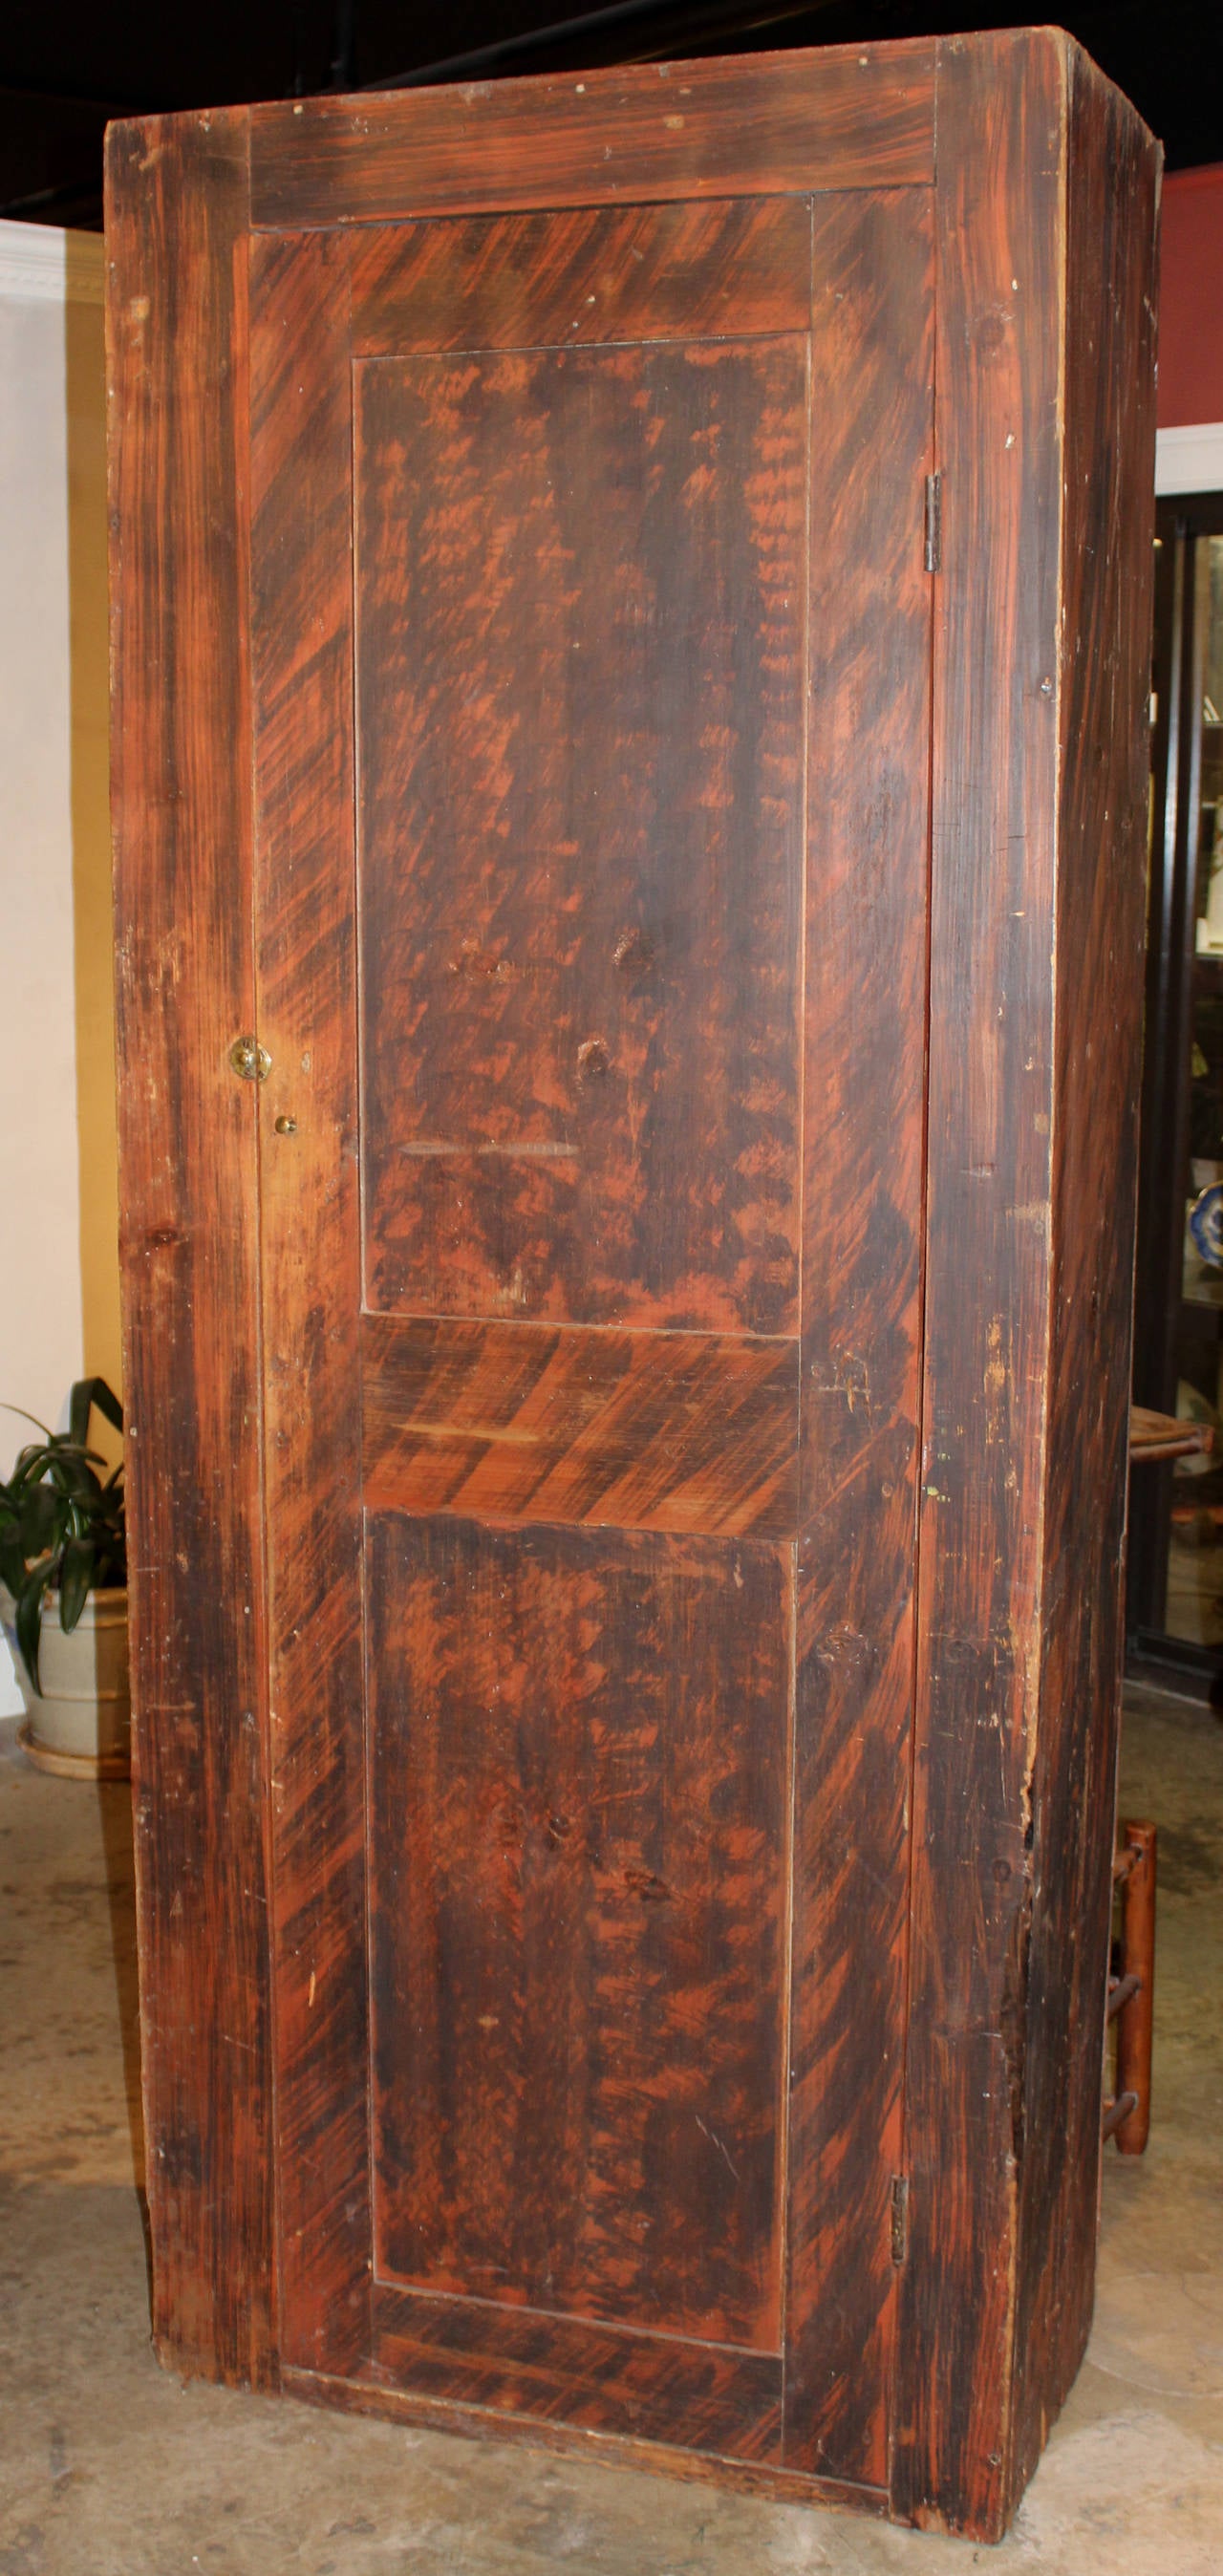 A rare pine red and black grain painted pantry cupboard, of New England origin, circa 1840, with paneled door which opens to a dry sink interior, two shelves and supports for two more, as well as a lower open compartment below the dry sink. A great